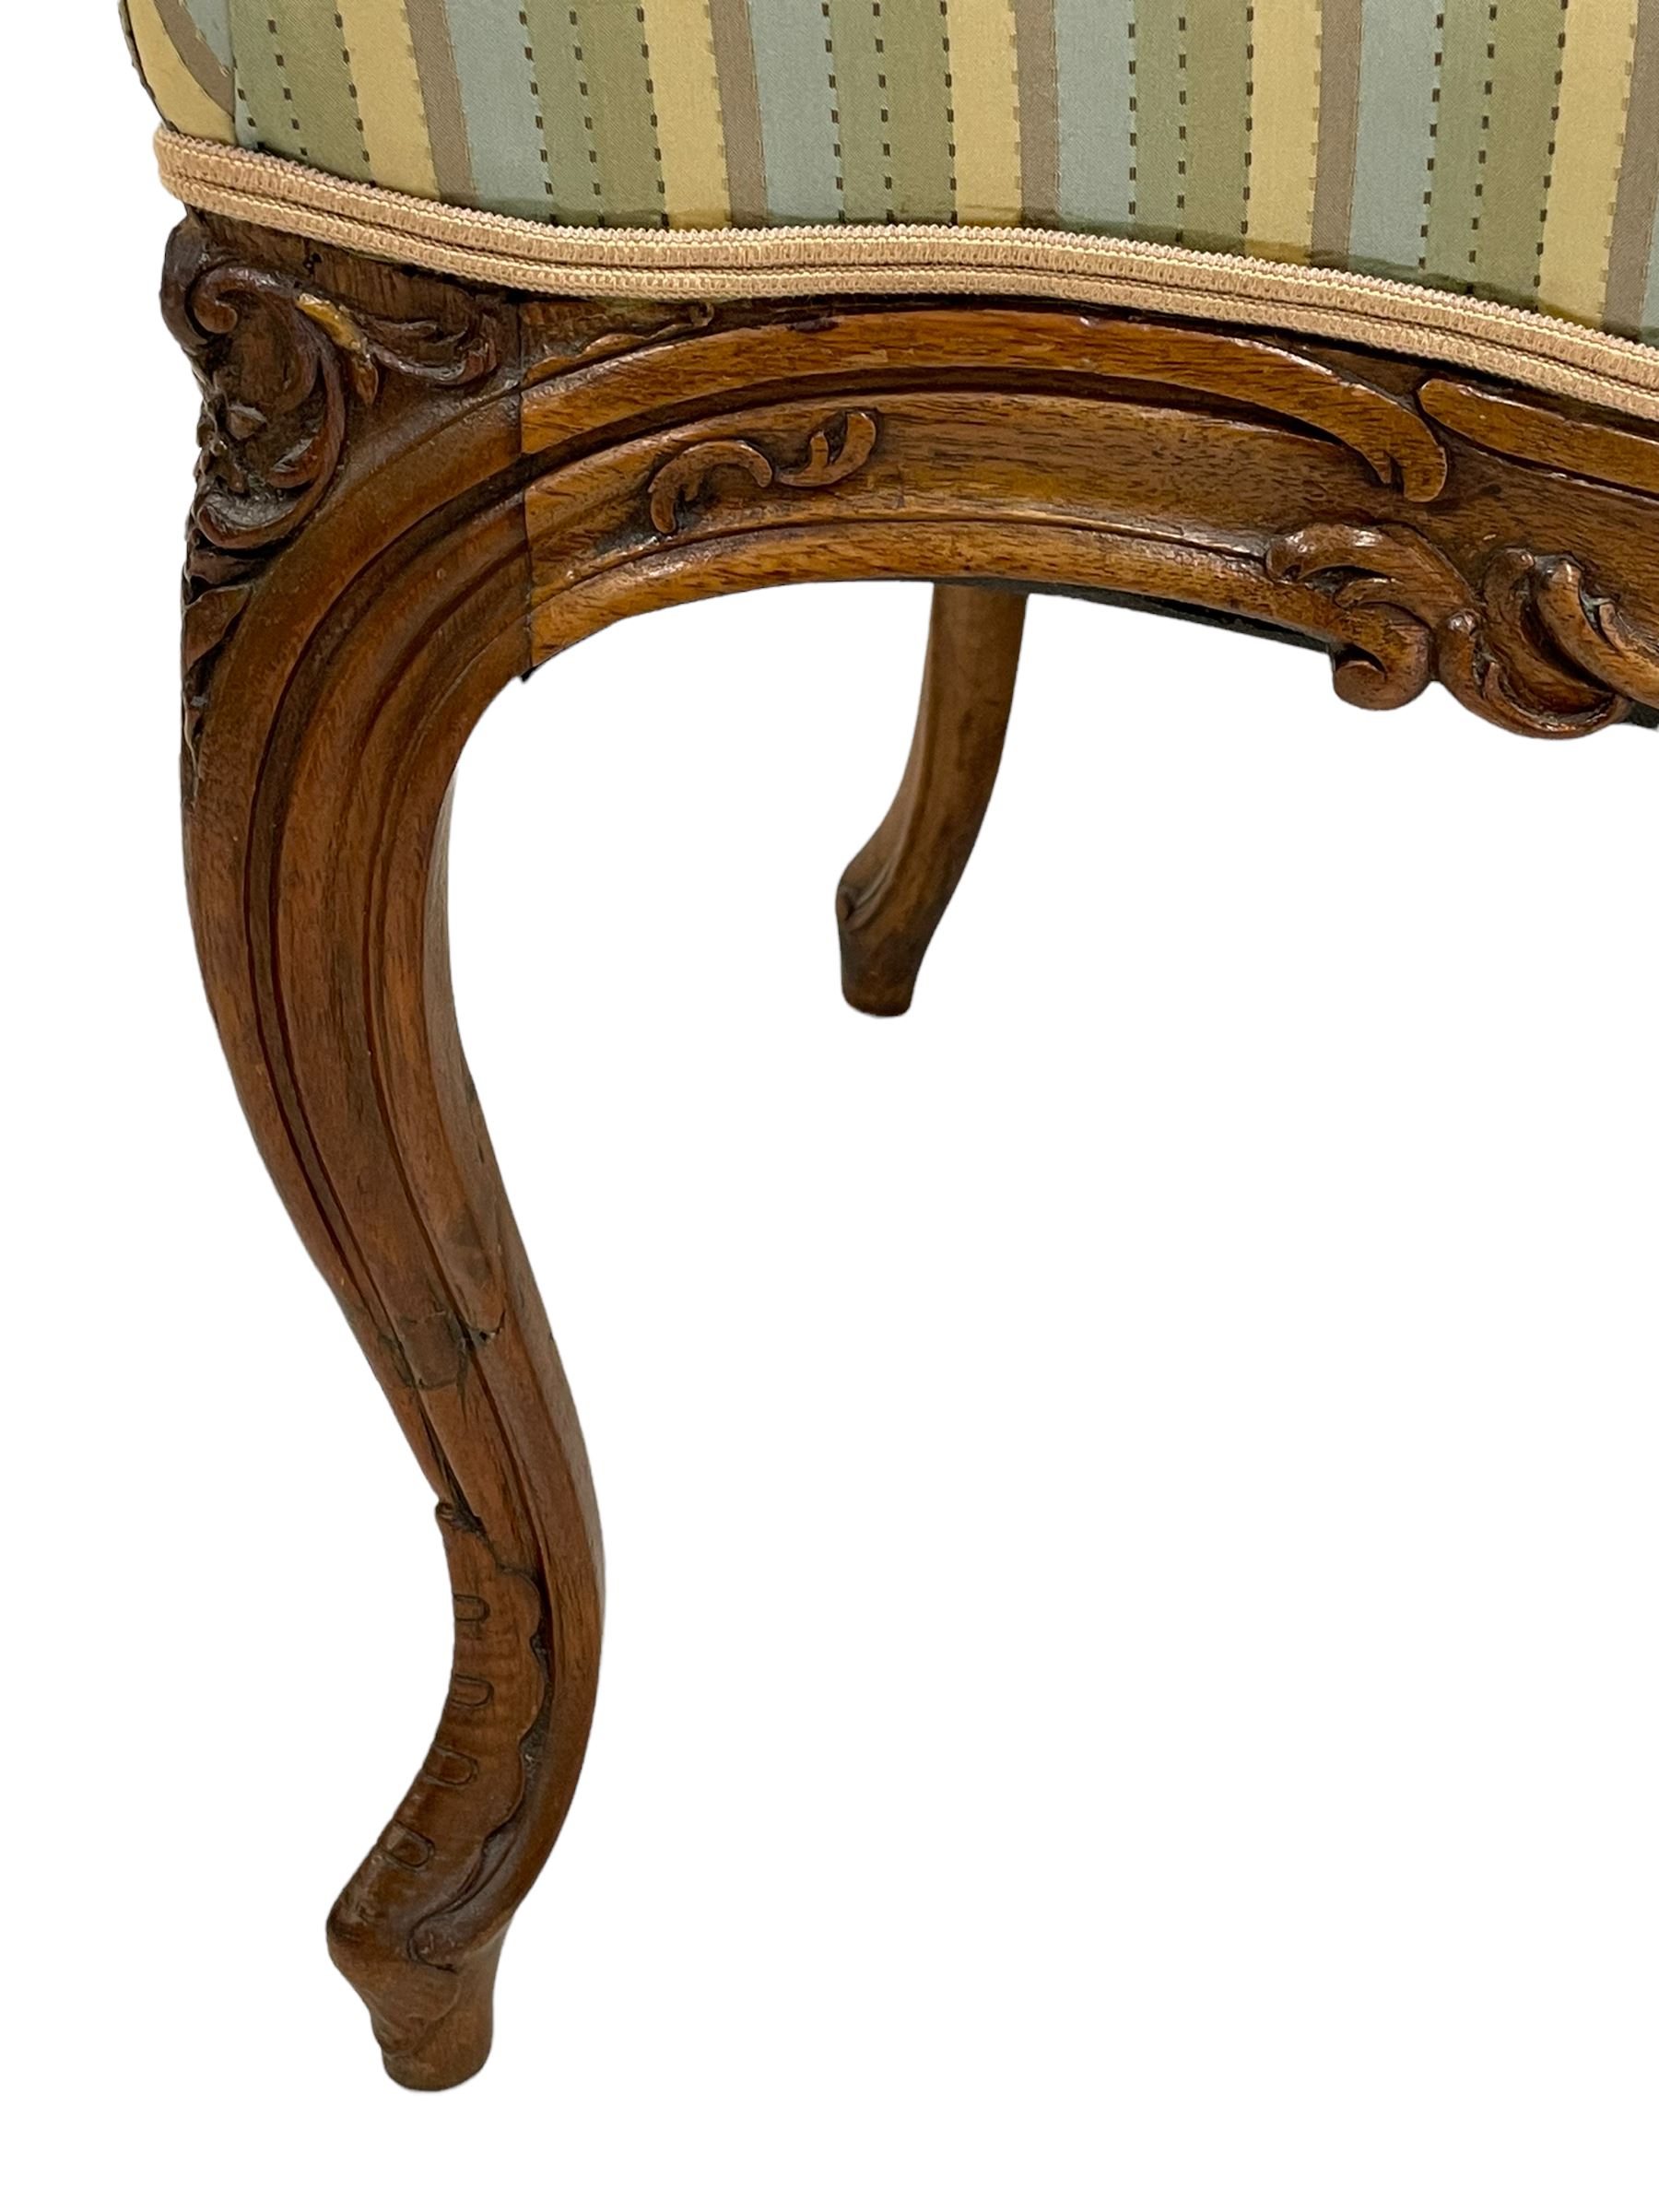 Late 20th century French walnut settee - Image 5 of 8